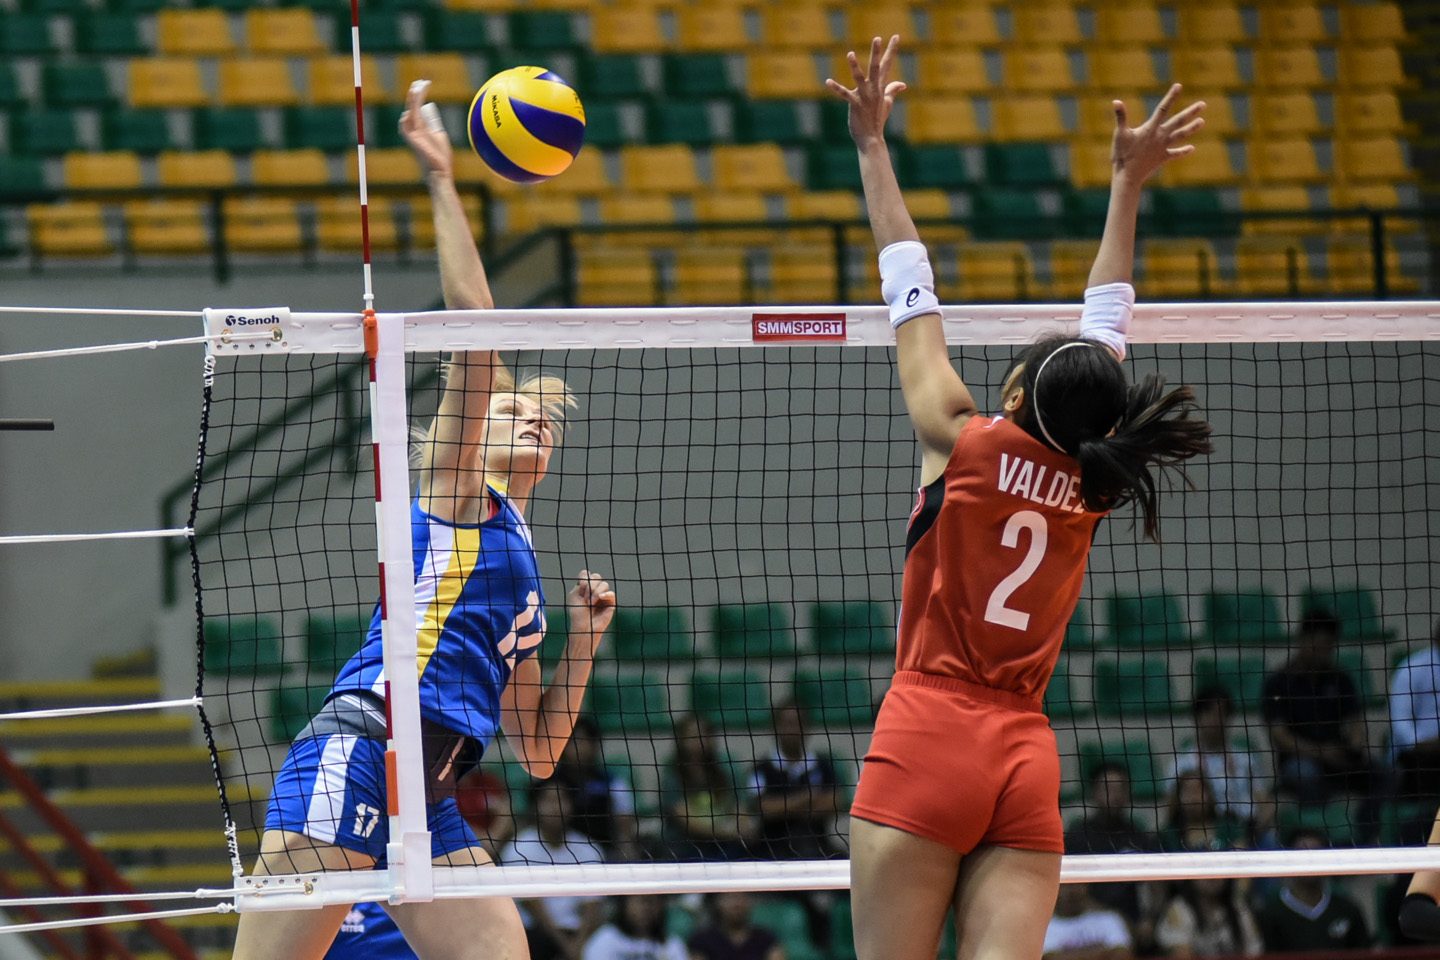 Philippines falls to Kazakhstan again, finishes 8th in Asian Seniors